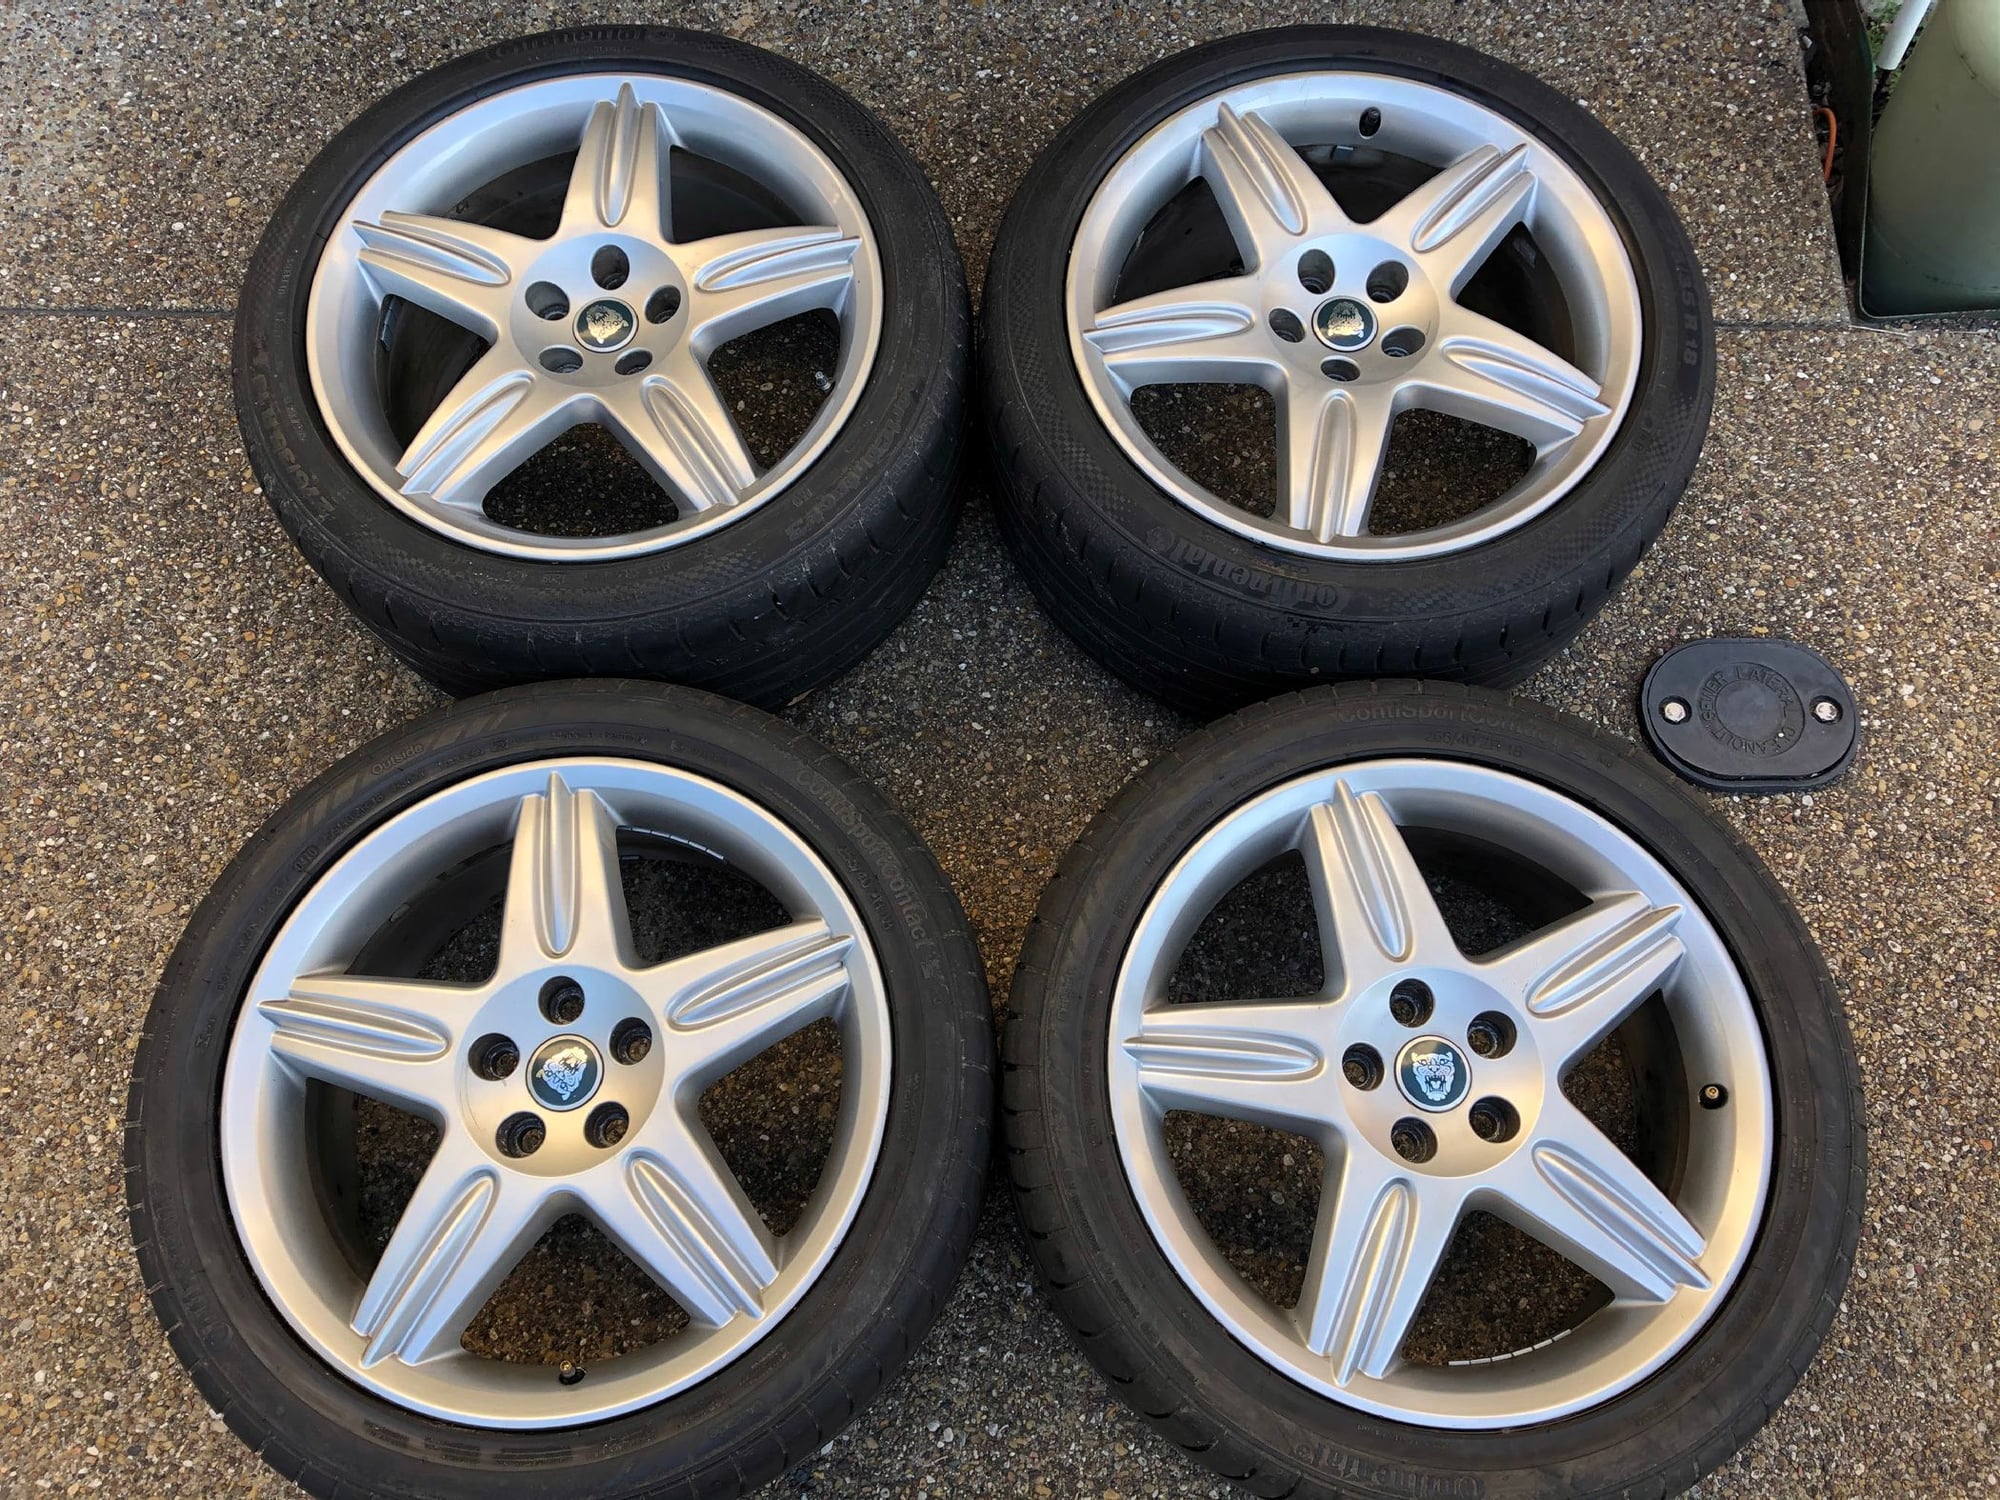 Wheels and Tires/Axles - FS Jaguar S-Type R Wheels W/ Conti Tires - Used - 2000 to 2008 Jaguar S-Type - Dallas, TX 75206, United States